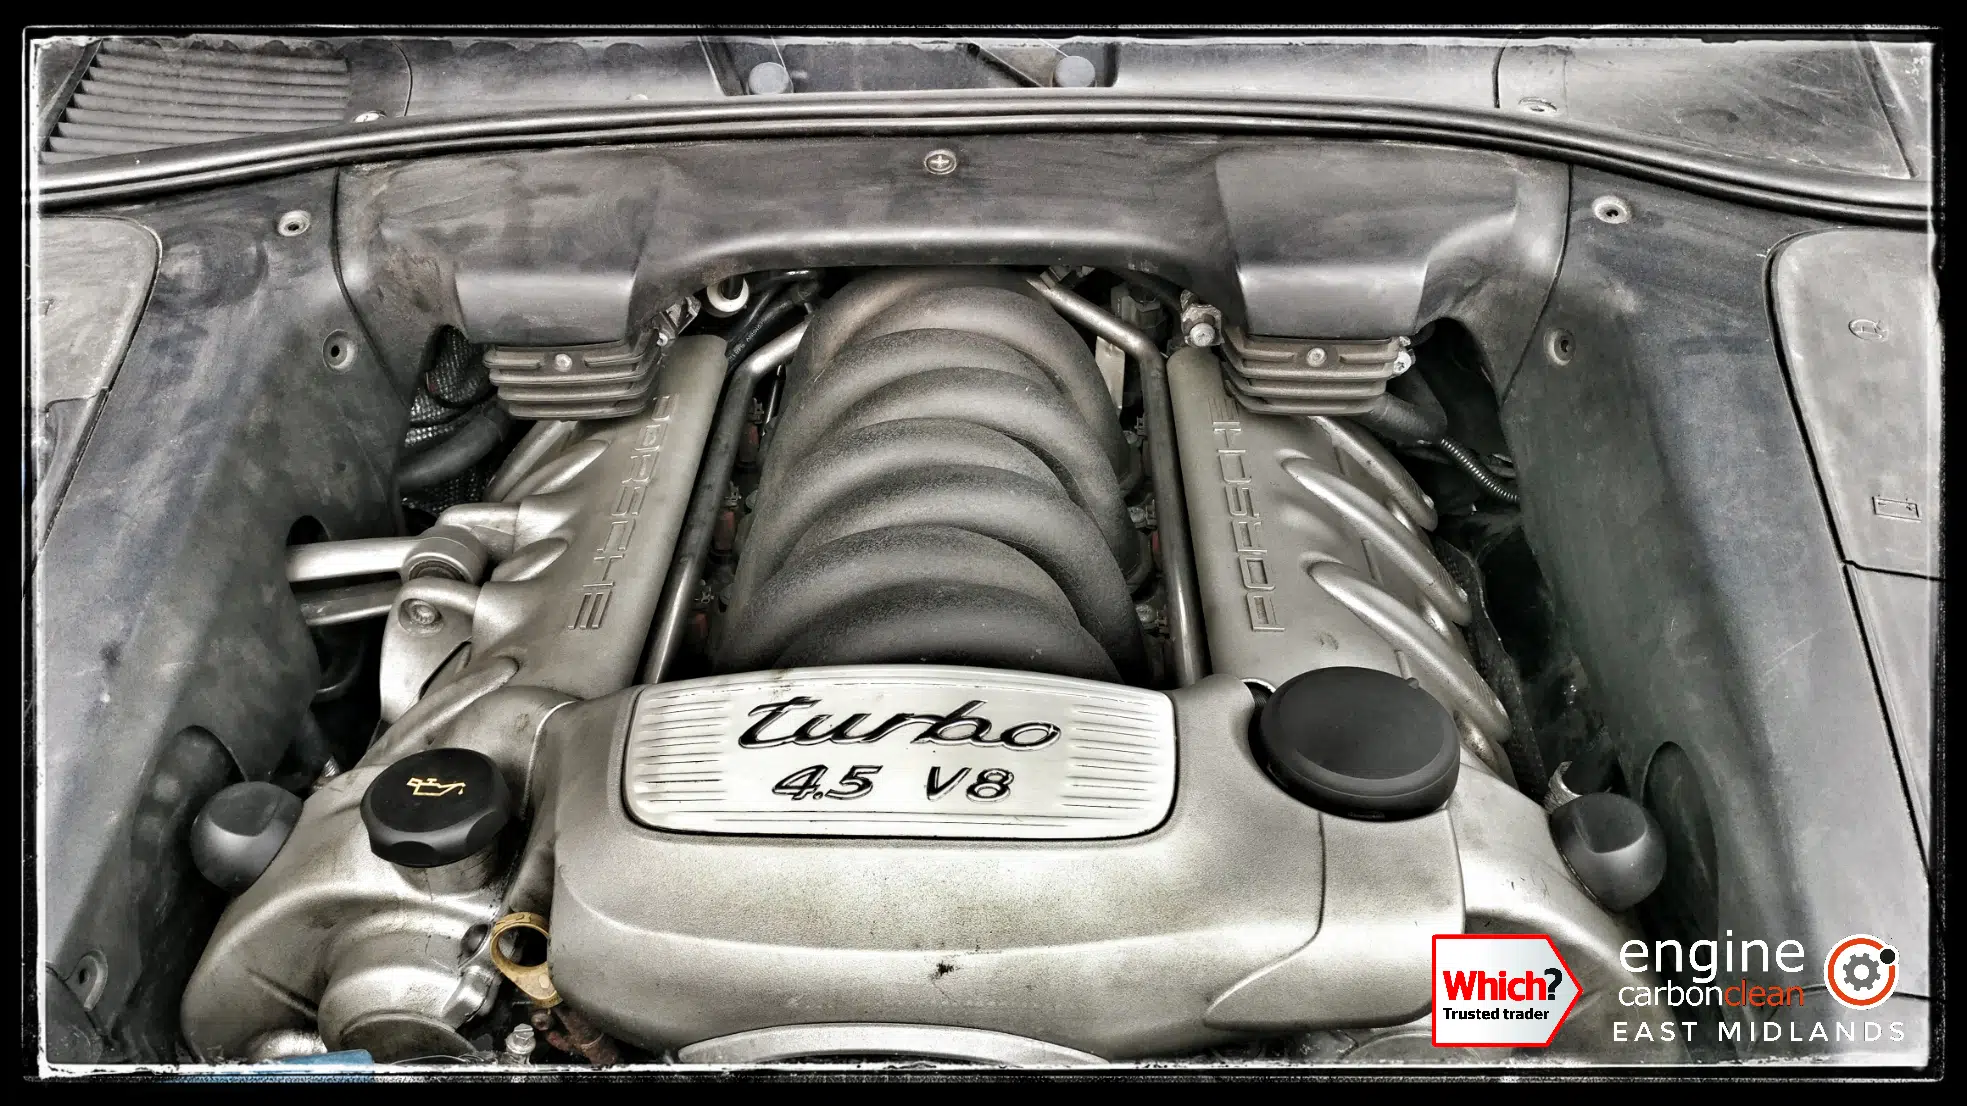 Lack of cooling meant this engine bay was hot! Porsche Cayenne Turbo (2006) - 132,381 miles